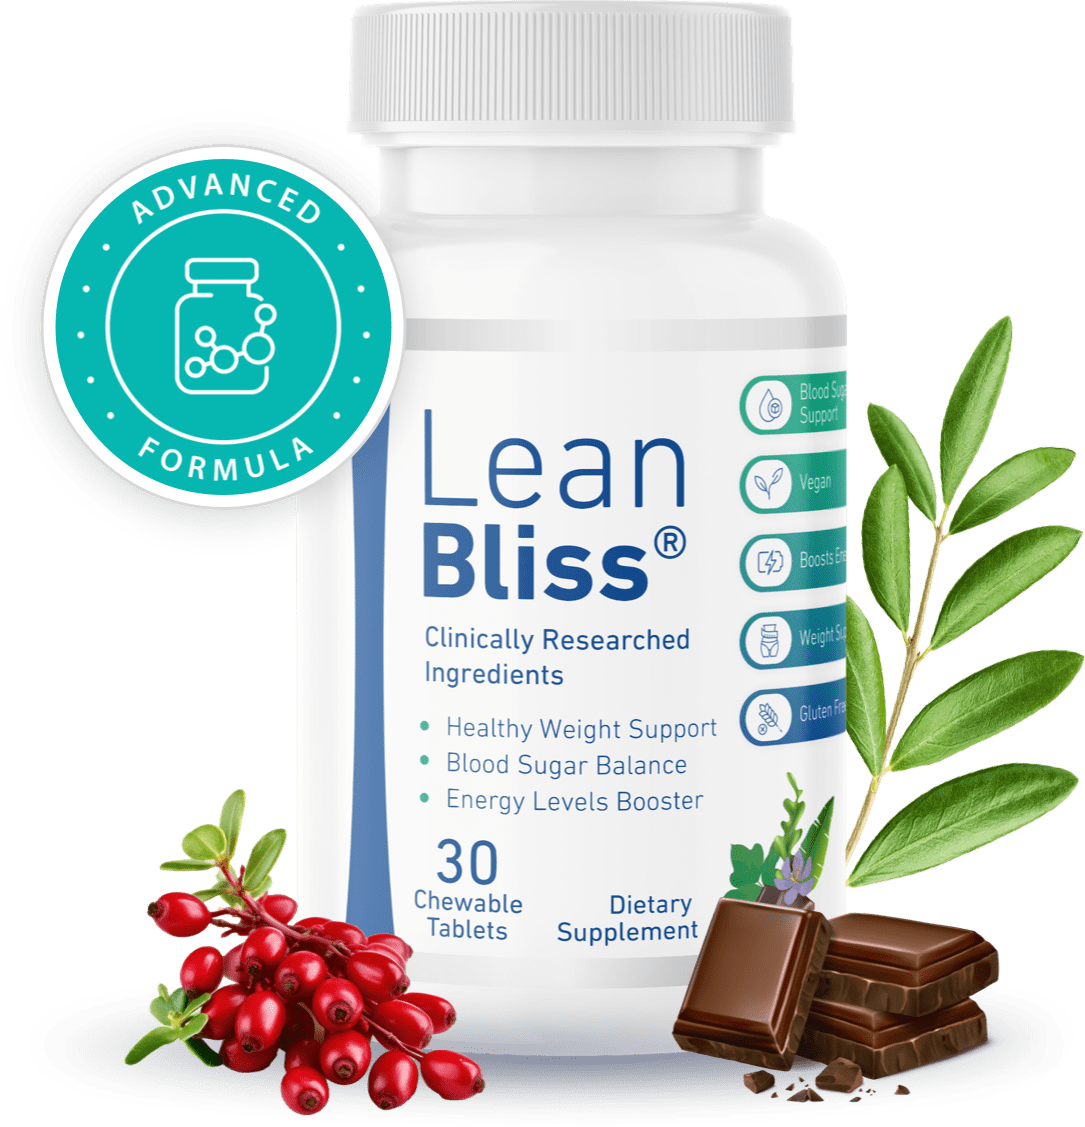 Discover LeanBliss Your Natural Path to Healthy Weight Loss - California - Santa Monica ID1523947